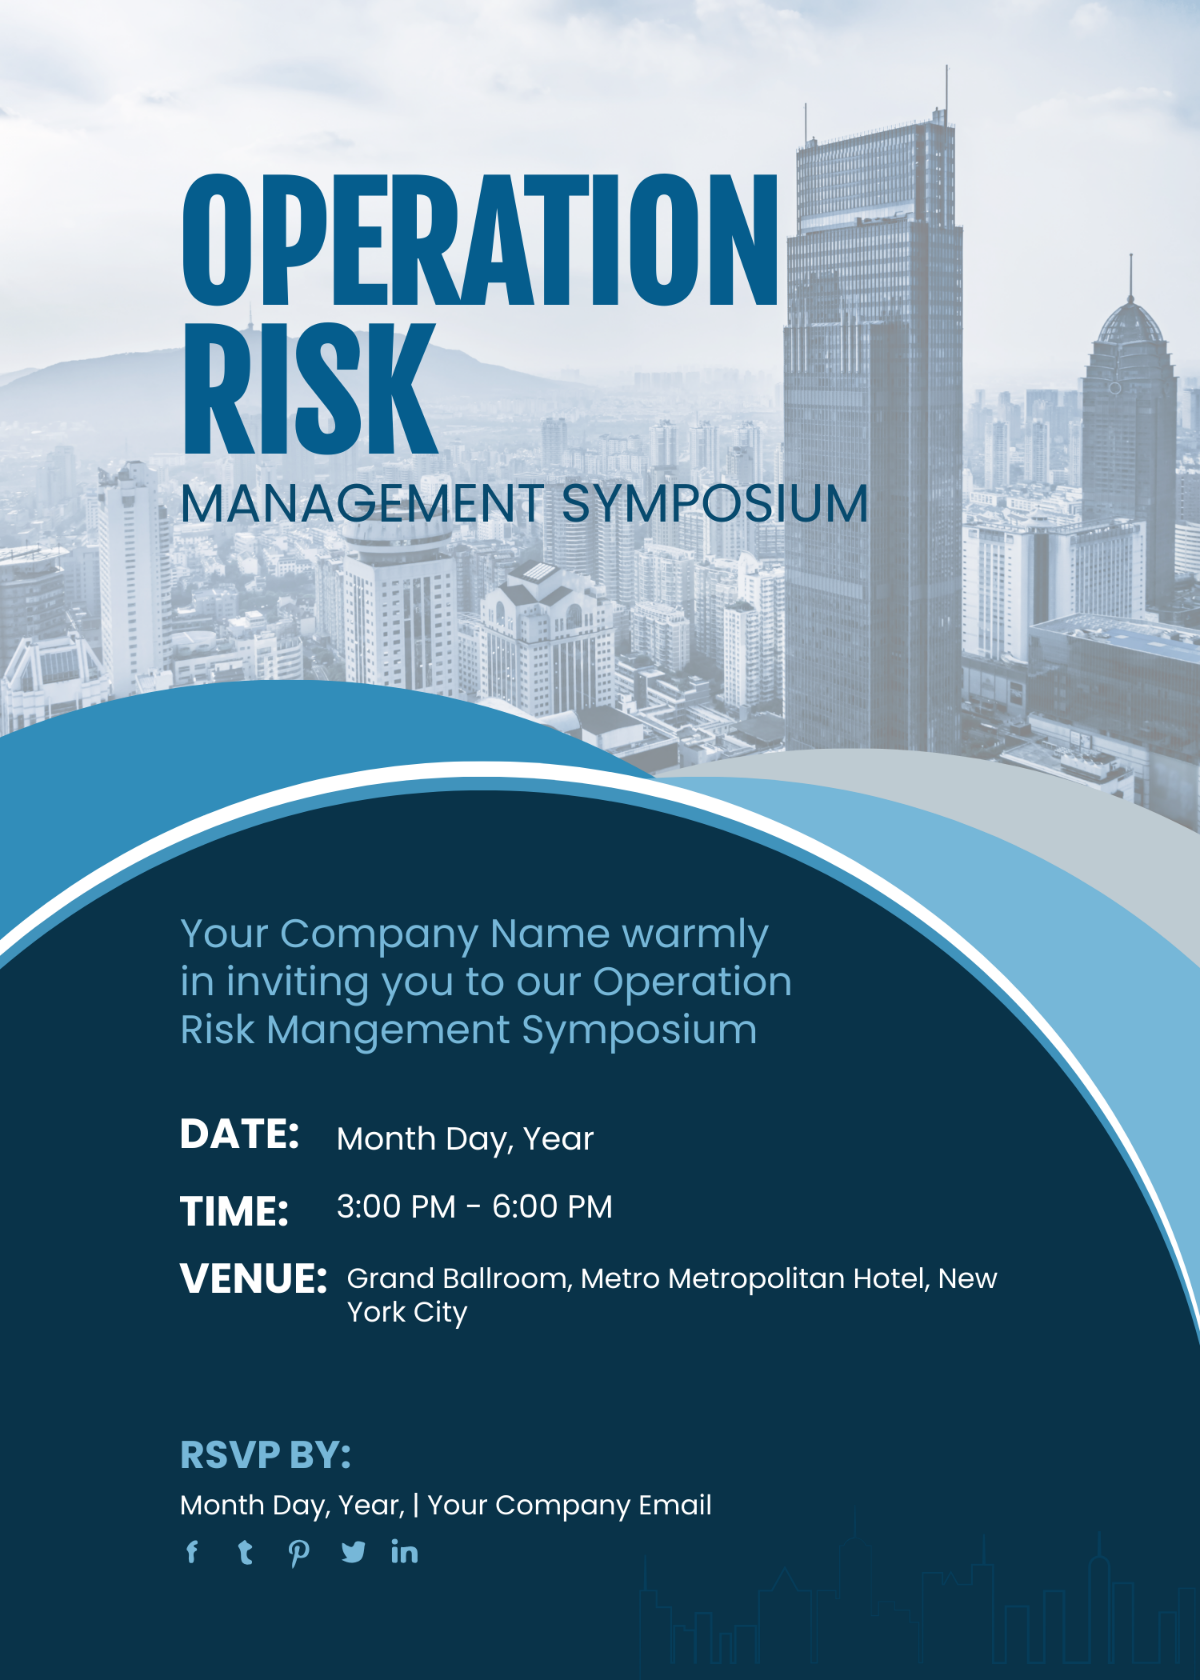 Operations Risk Management Symposium Invitation Card Template